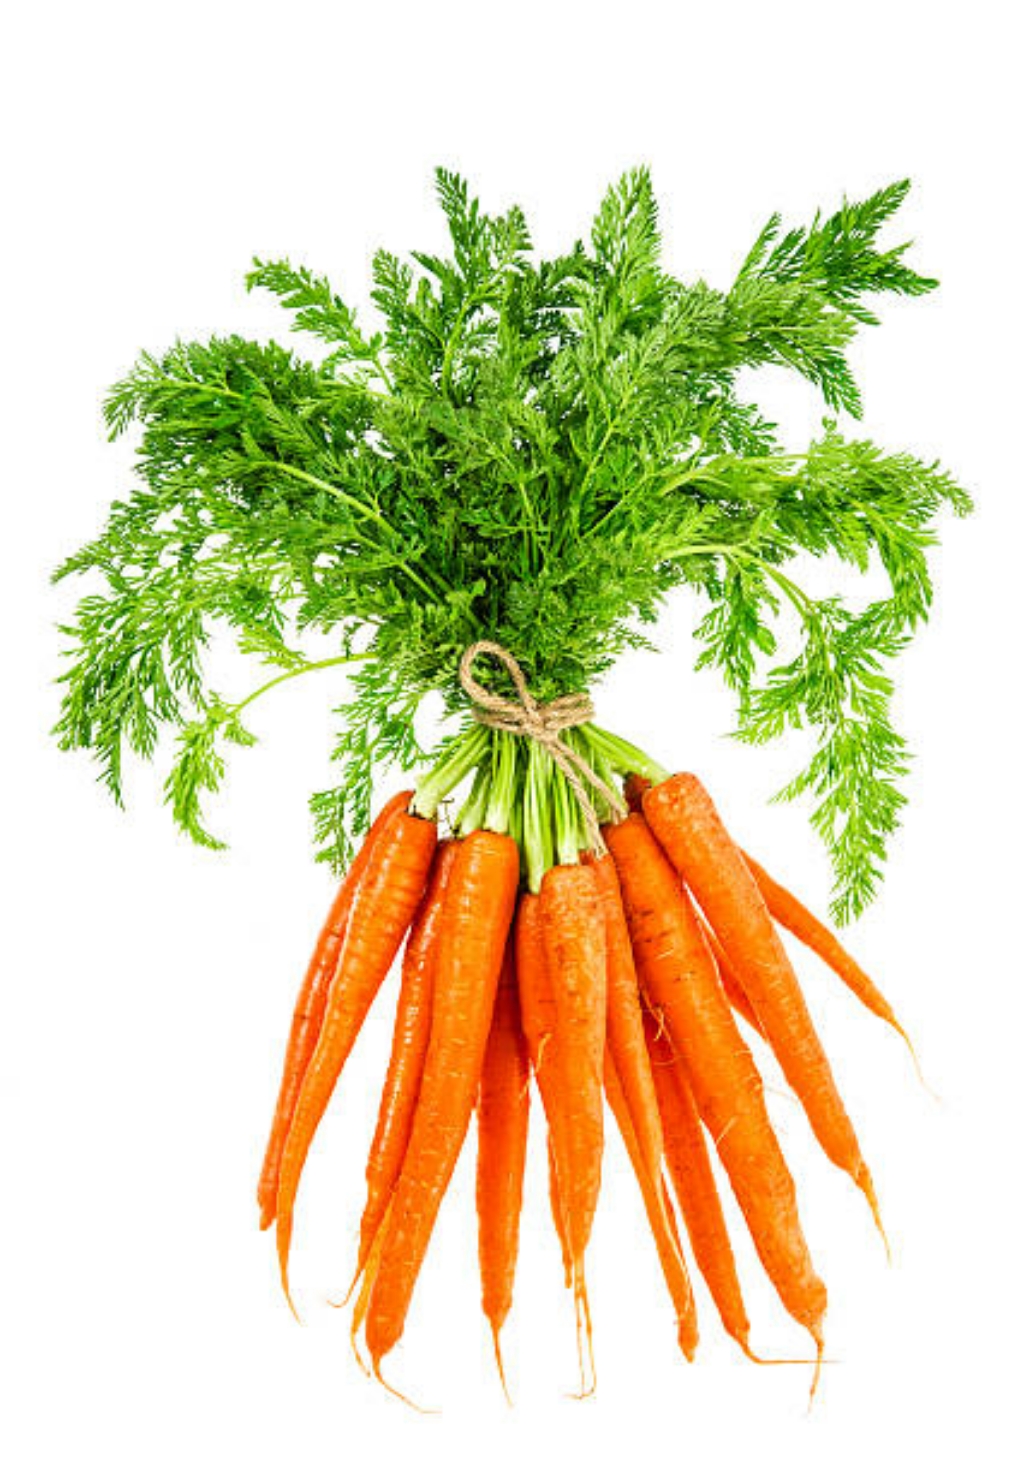 Bunched carrots